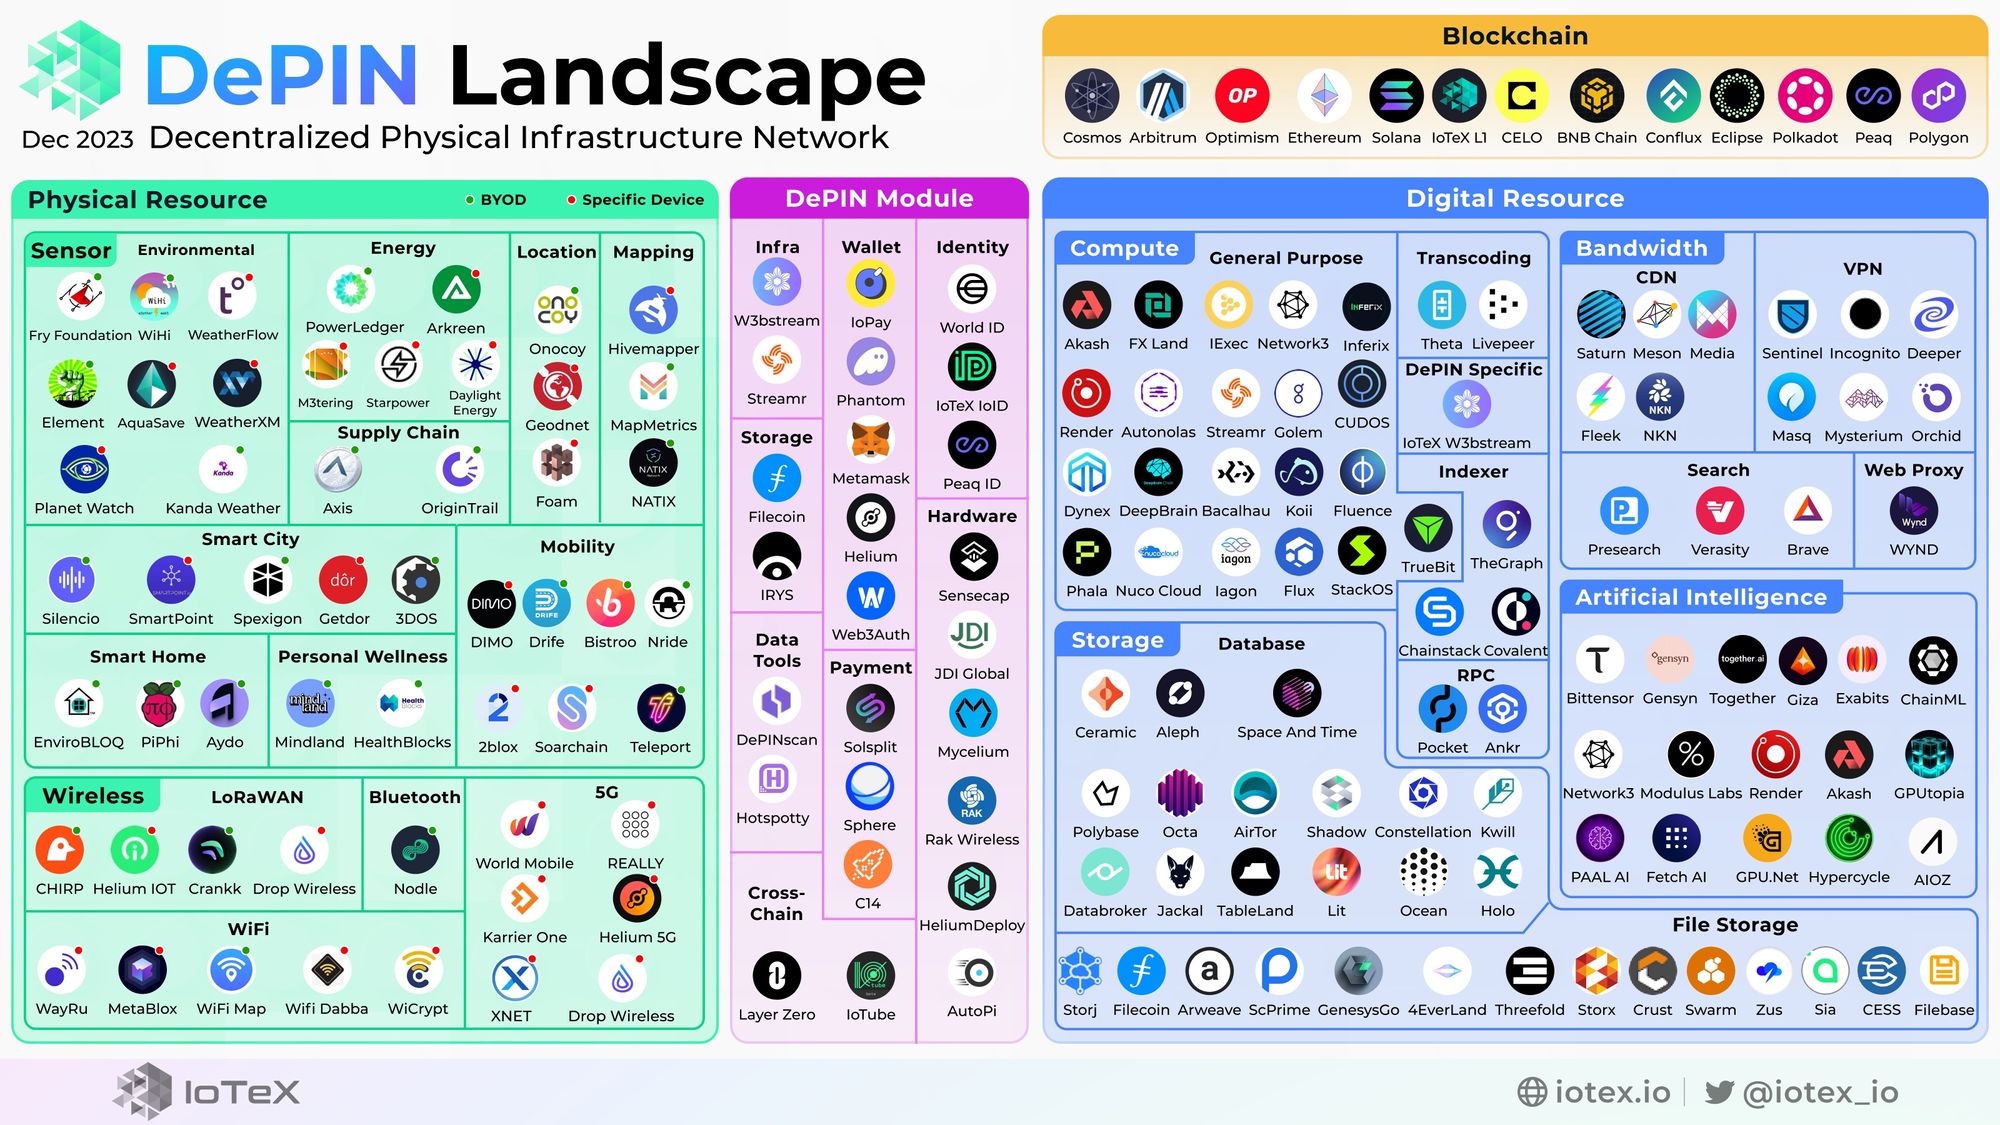 DePIN Landscape Map, December 2023, Decentralized Physical Infrastructure Network, IoTeX